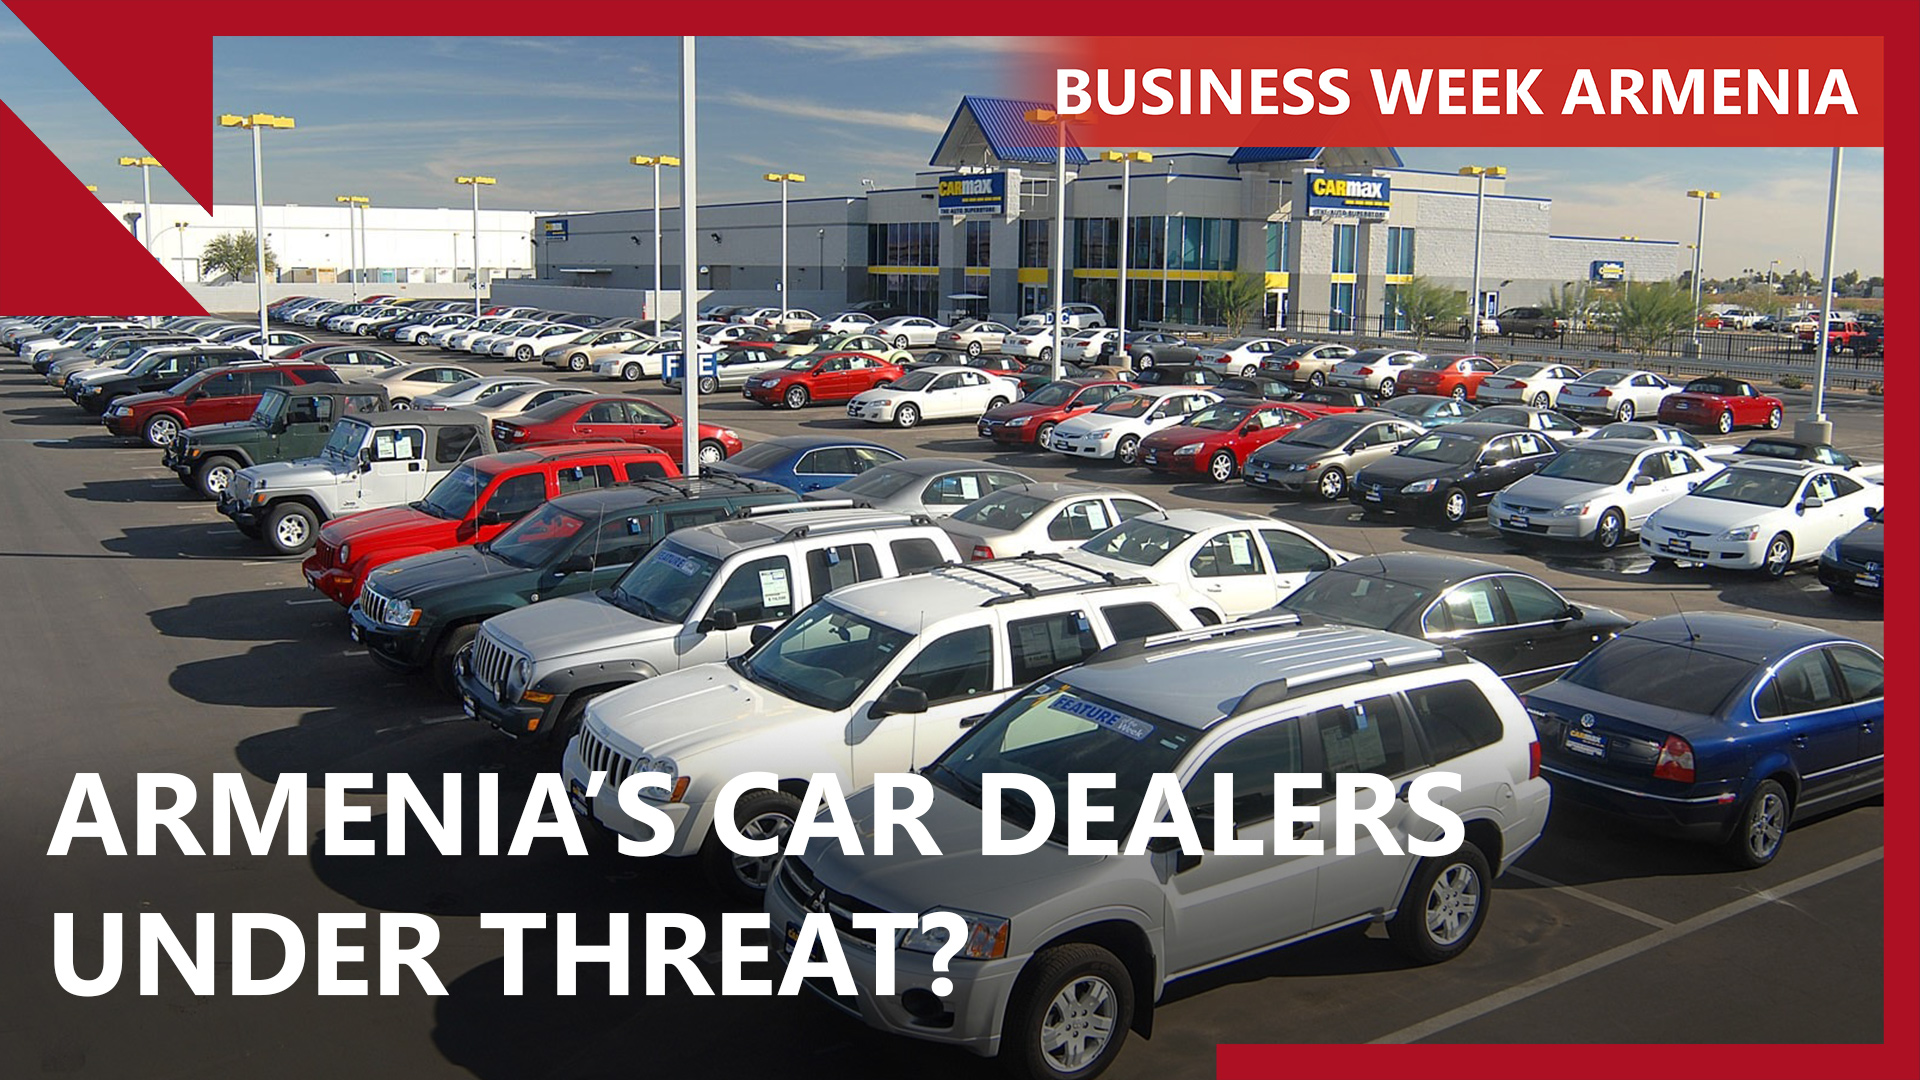 Georgia՚s ban on car re-exports to Russia raises concern in Armenia: THIS WEEK IN BUSINESS